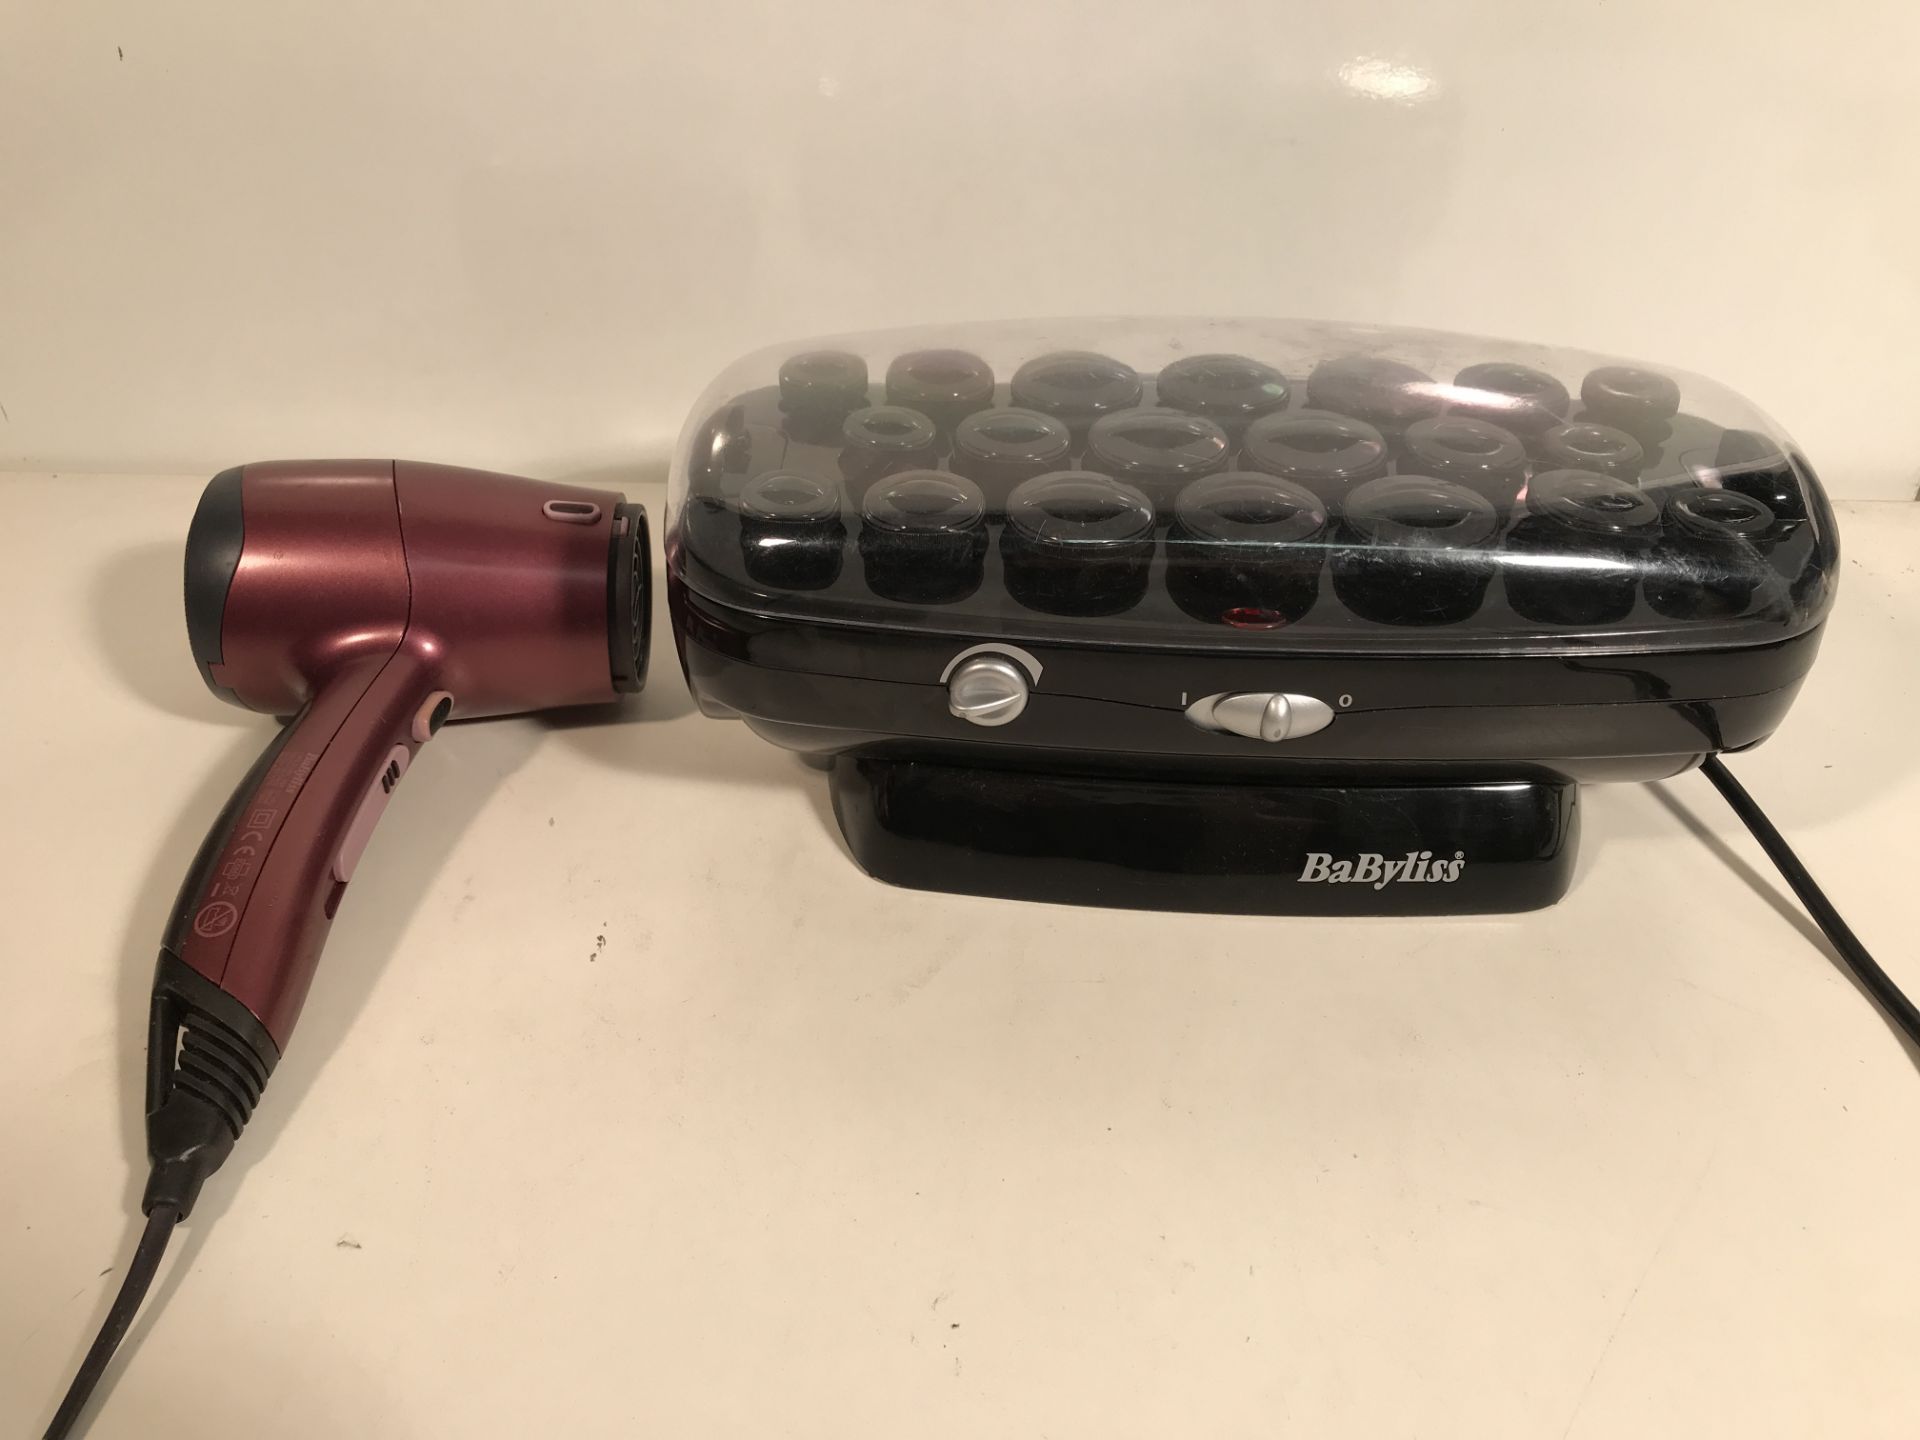 BaByliss Haircare Products | Curler | Dryer